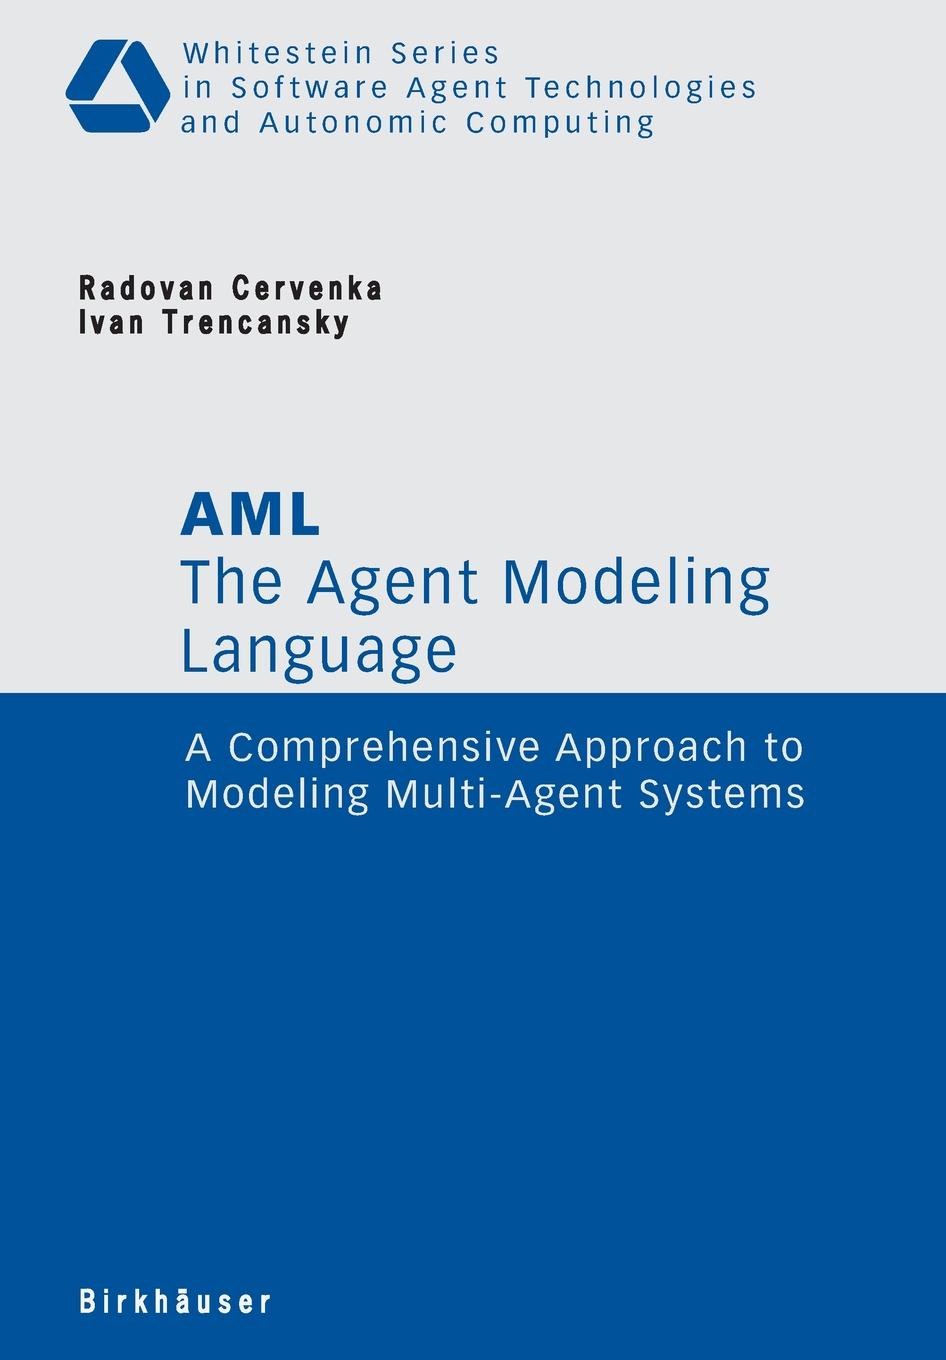 фото The Agent Modeling Language - AML. A Comprehensive Approach to Modeling Multi-Agent Systems